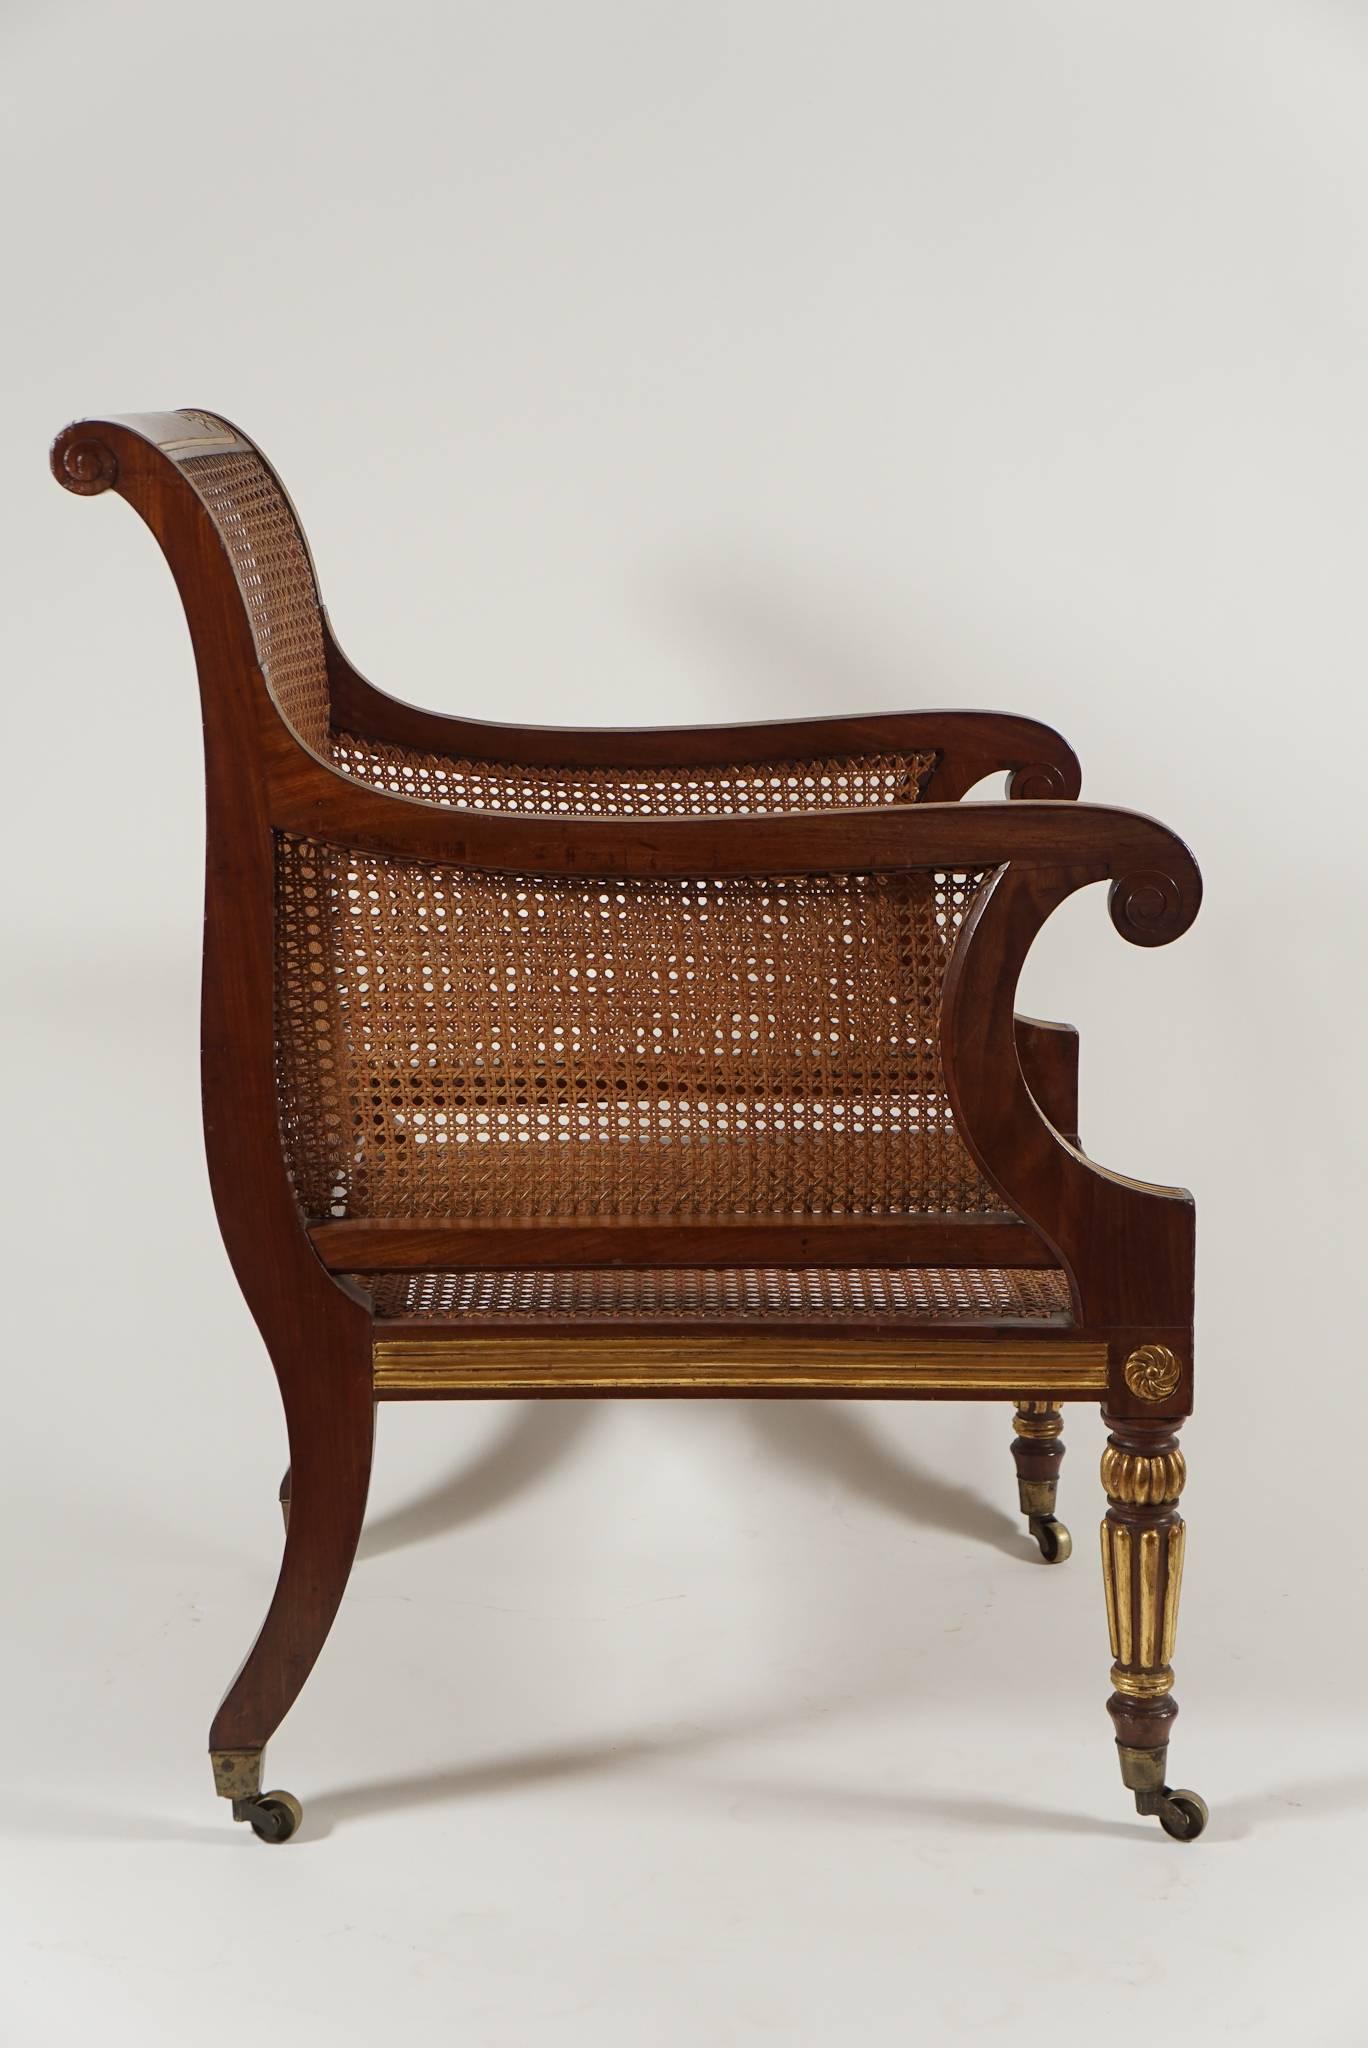 Fine English Regency period mahogany parcel-gilt bergere armchair having caned back, side panels, and seat. Backrest rail having carved and gilt bellflower panel detail with fluted gilt arms terminating in carved volute scrolls and gilt horizontal